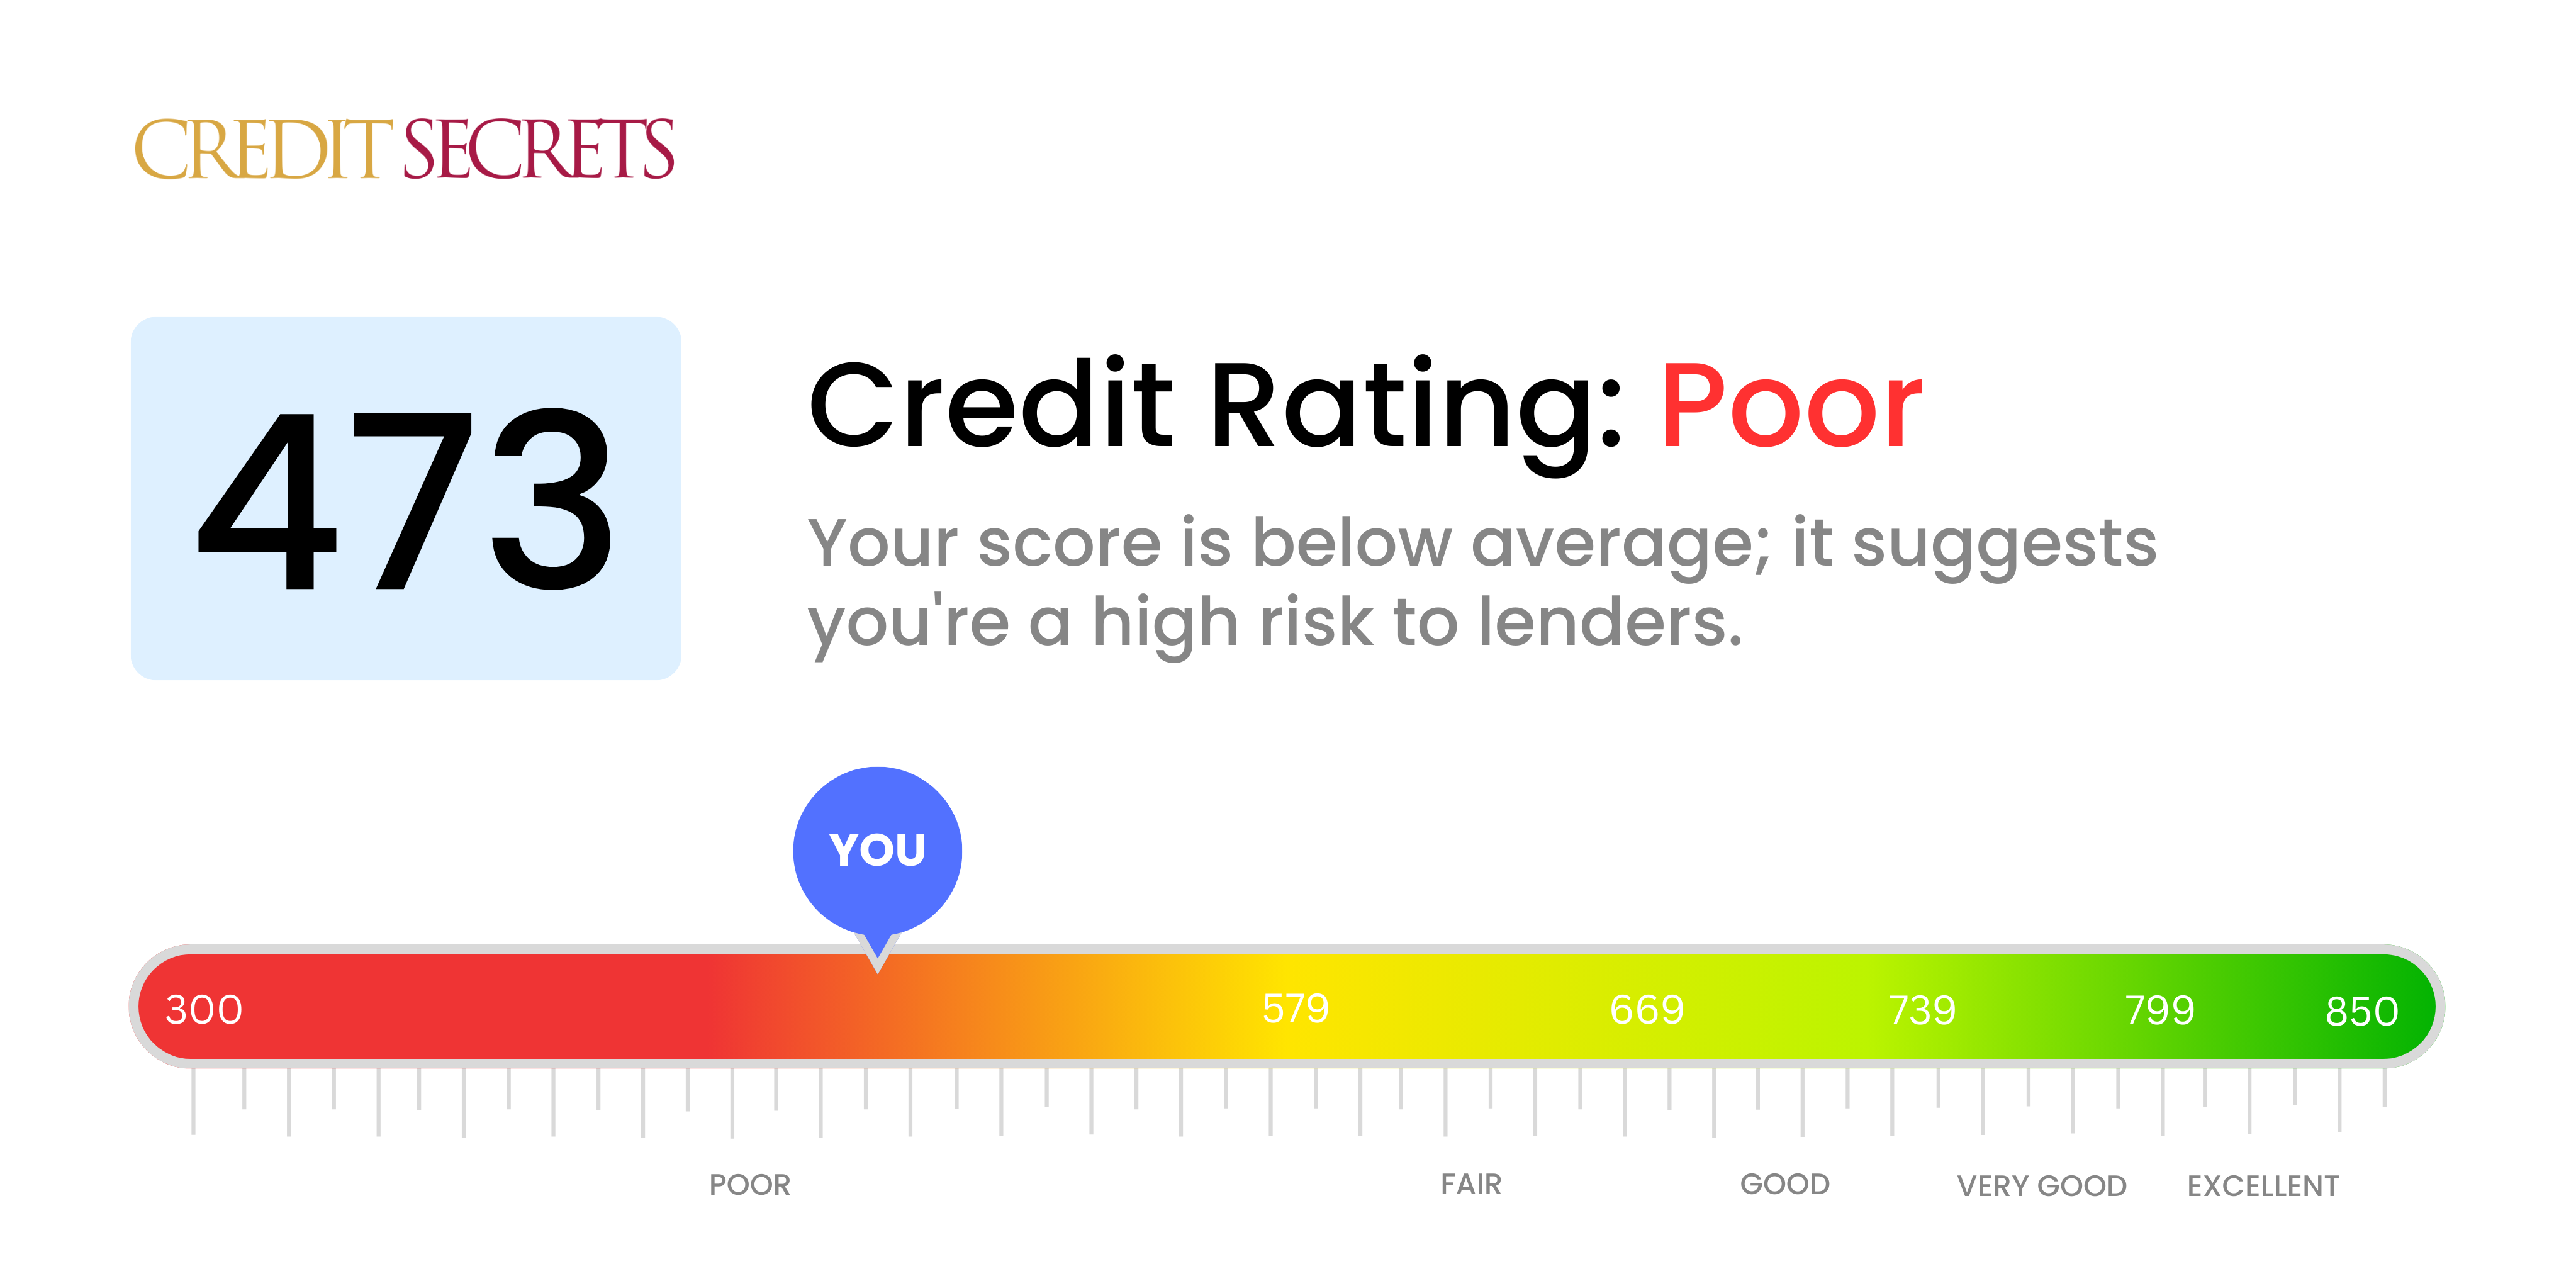 Is 473 a good credit score?